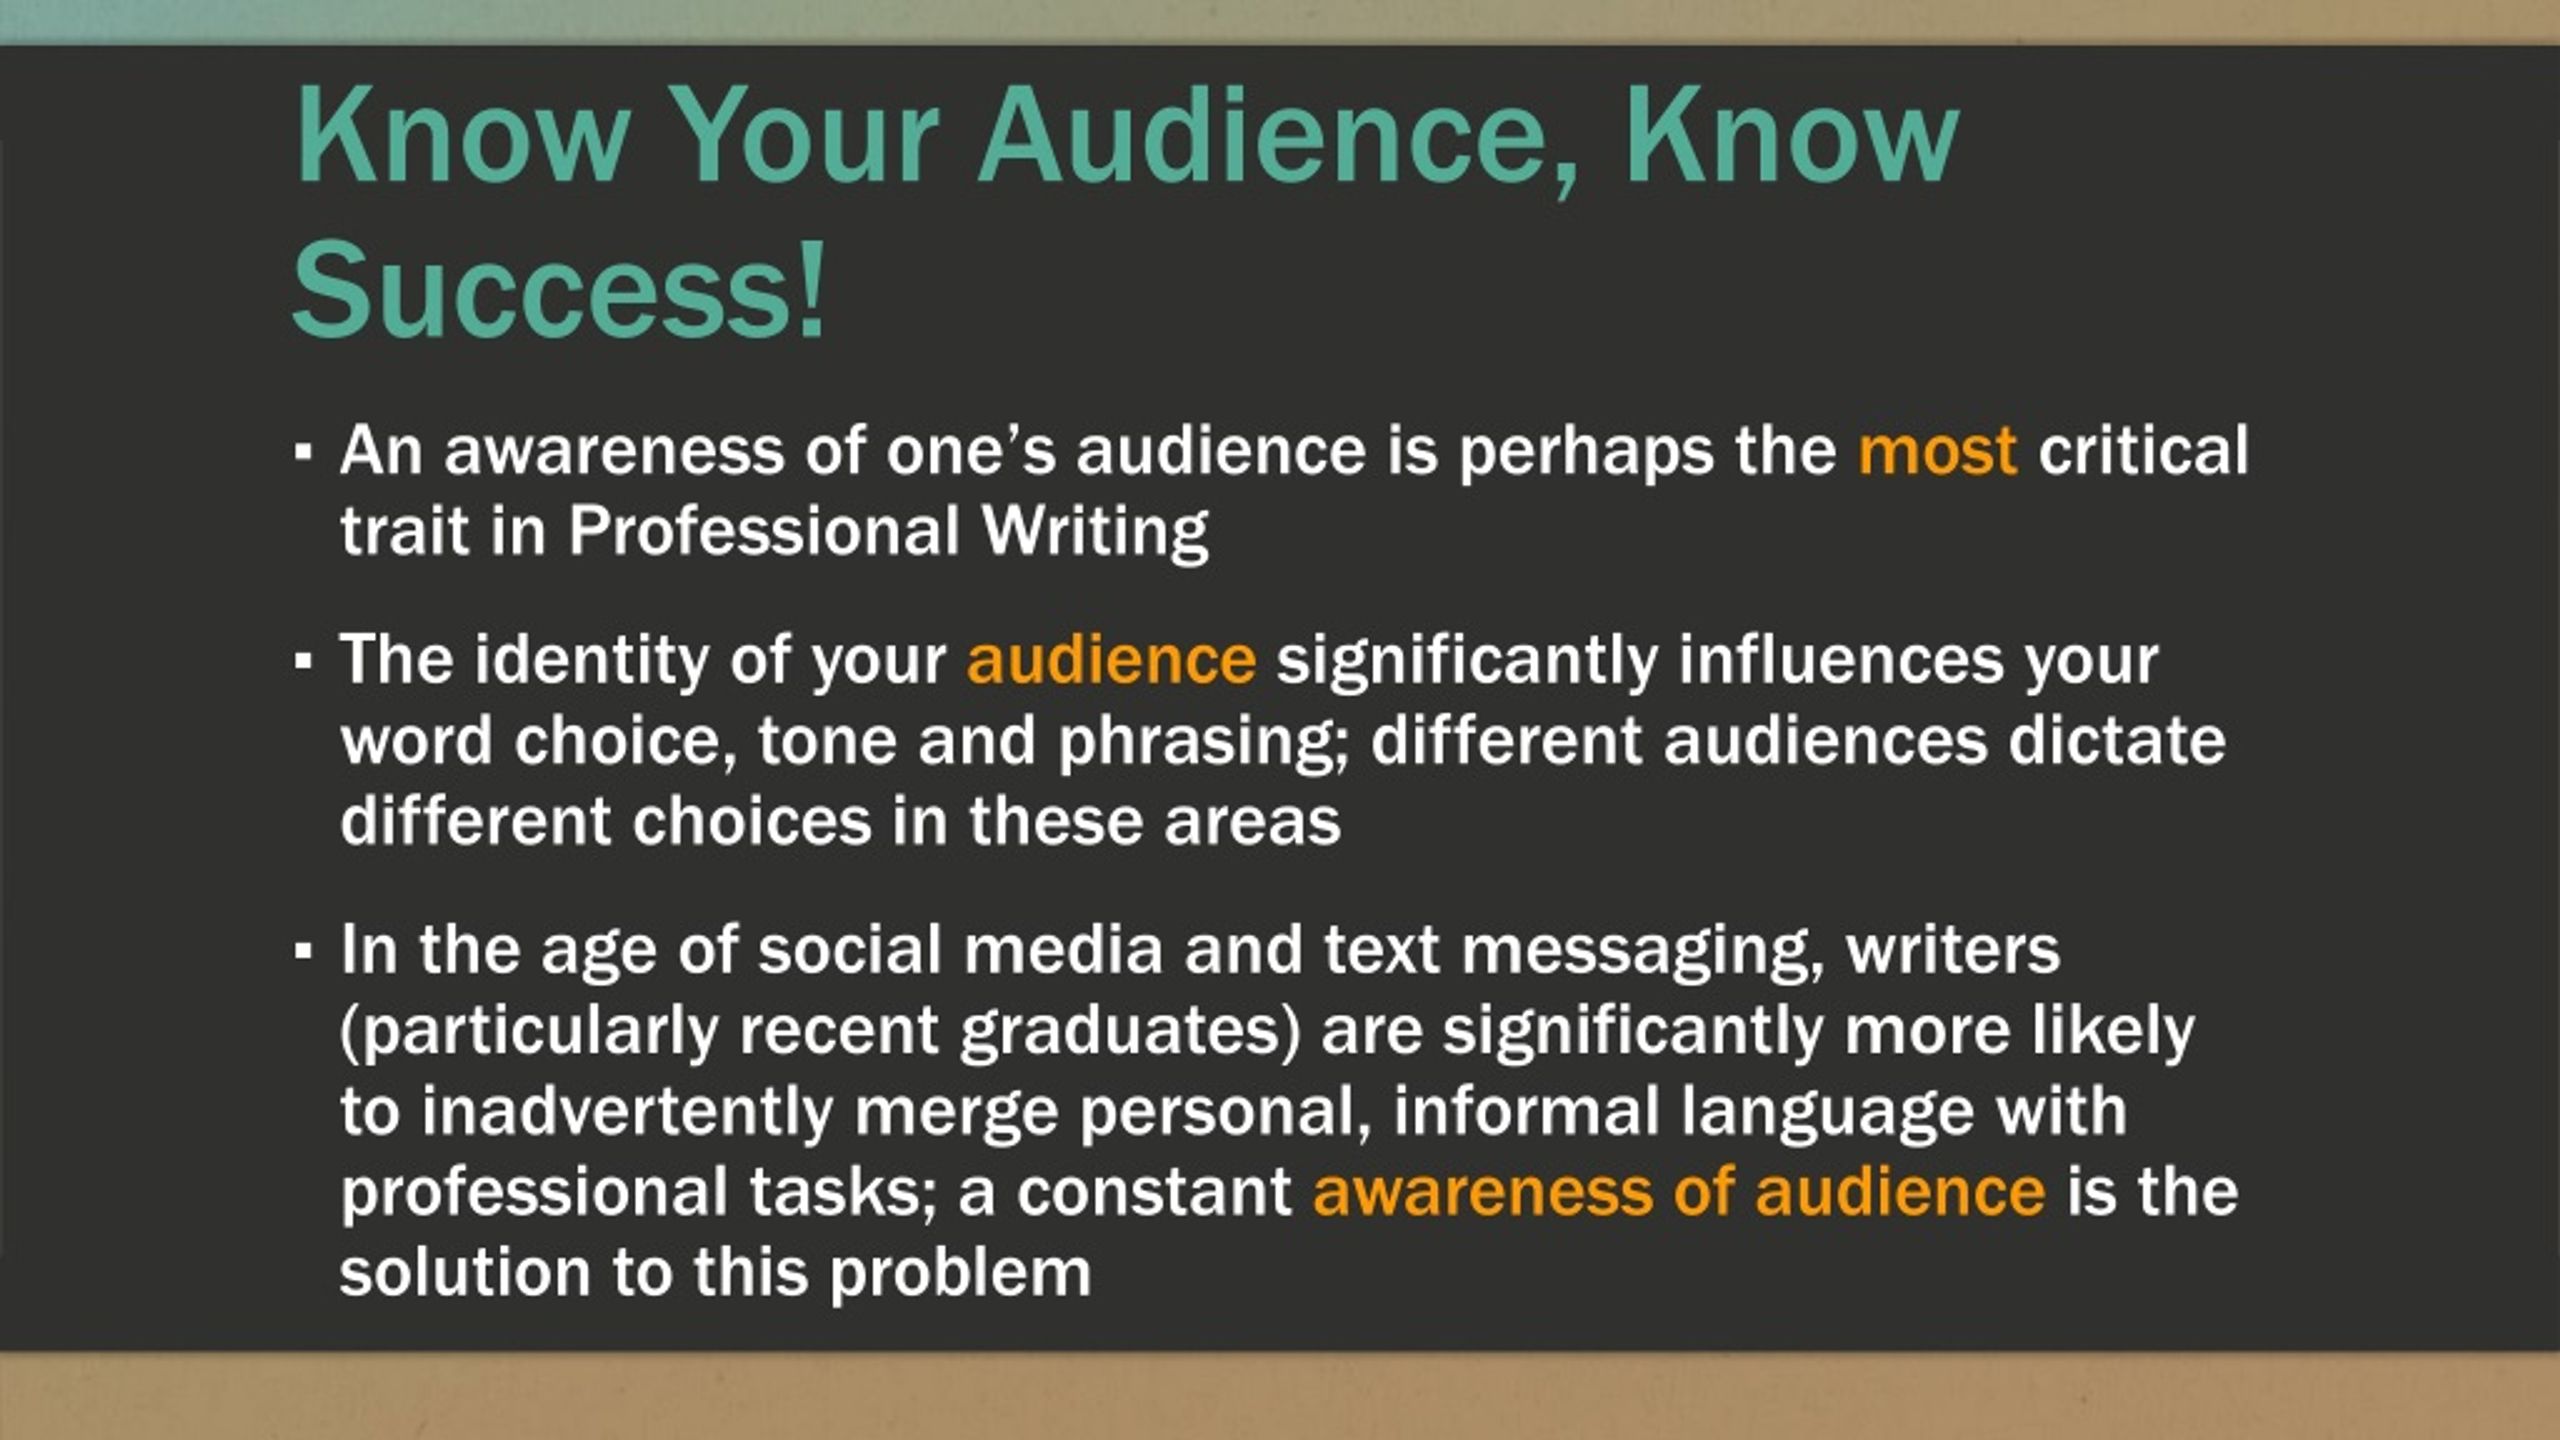 PPT Professional Writing Understanding Audience, Tone